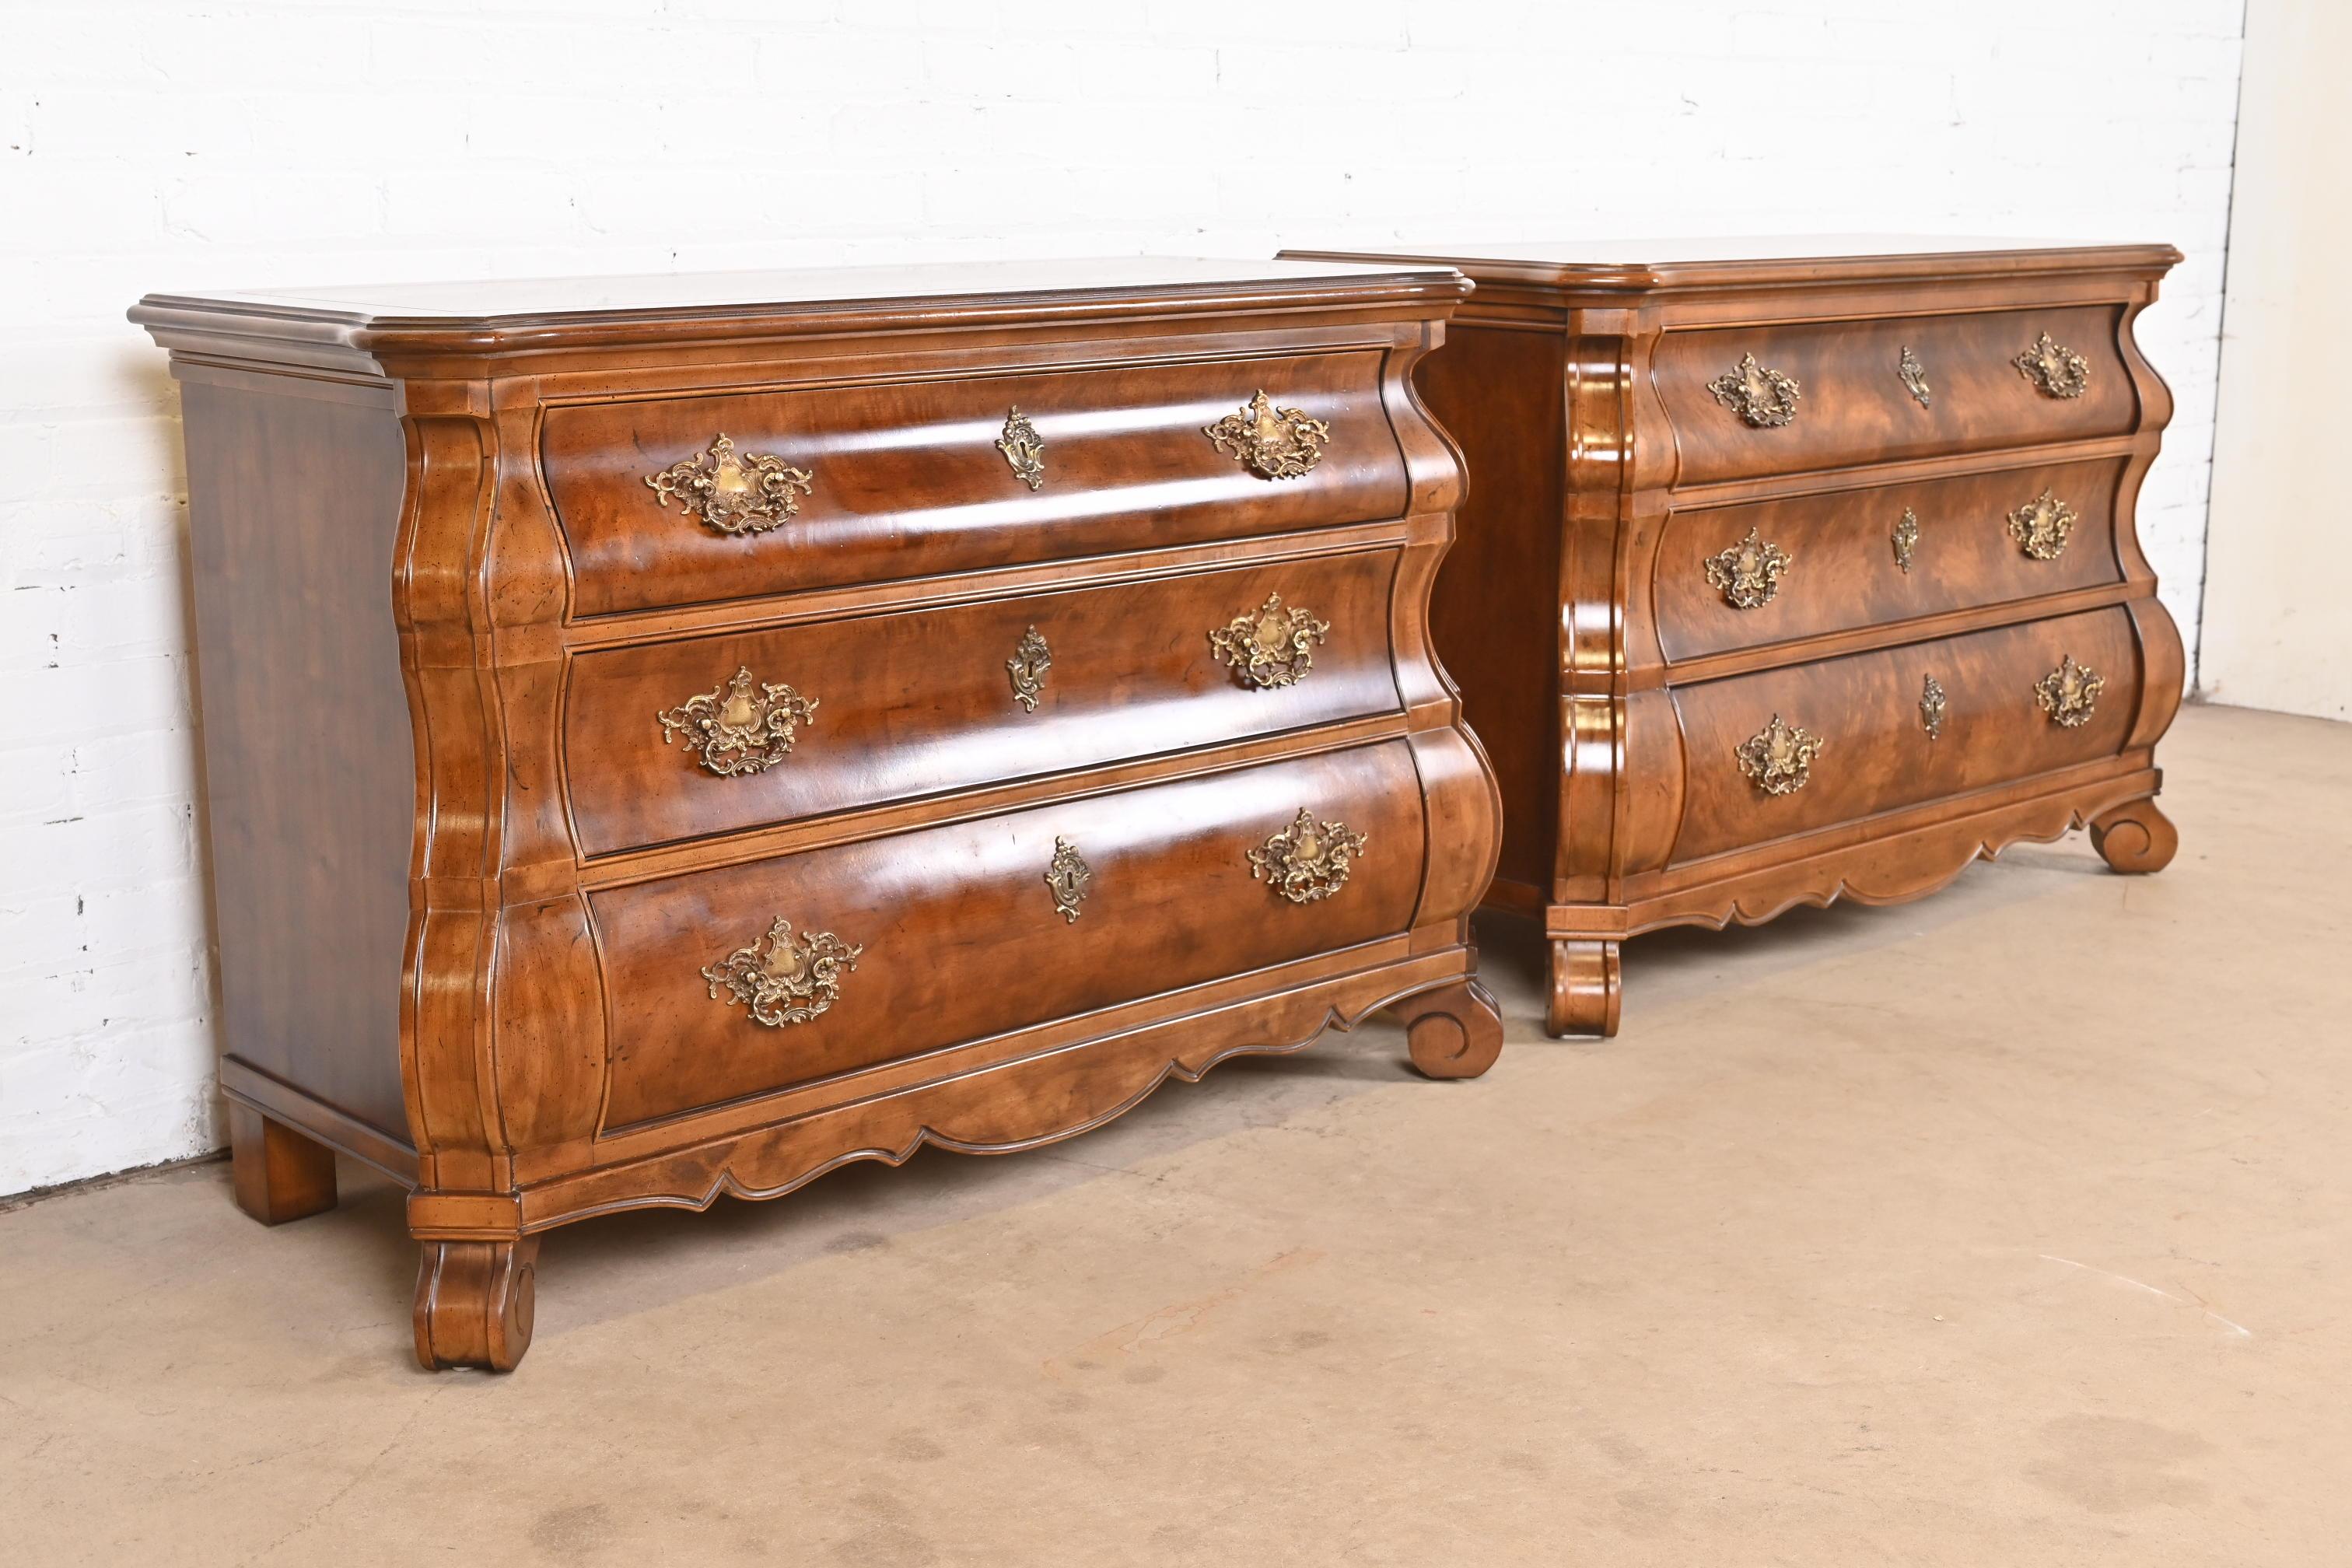 Brass Henredon Italian Baroque Burled Mahogany Bombay Chests or Commodes, Pair For Sale